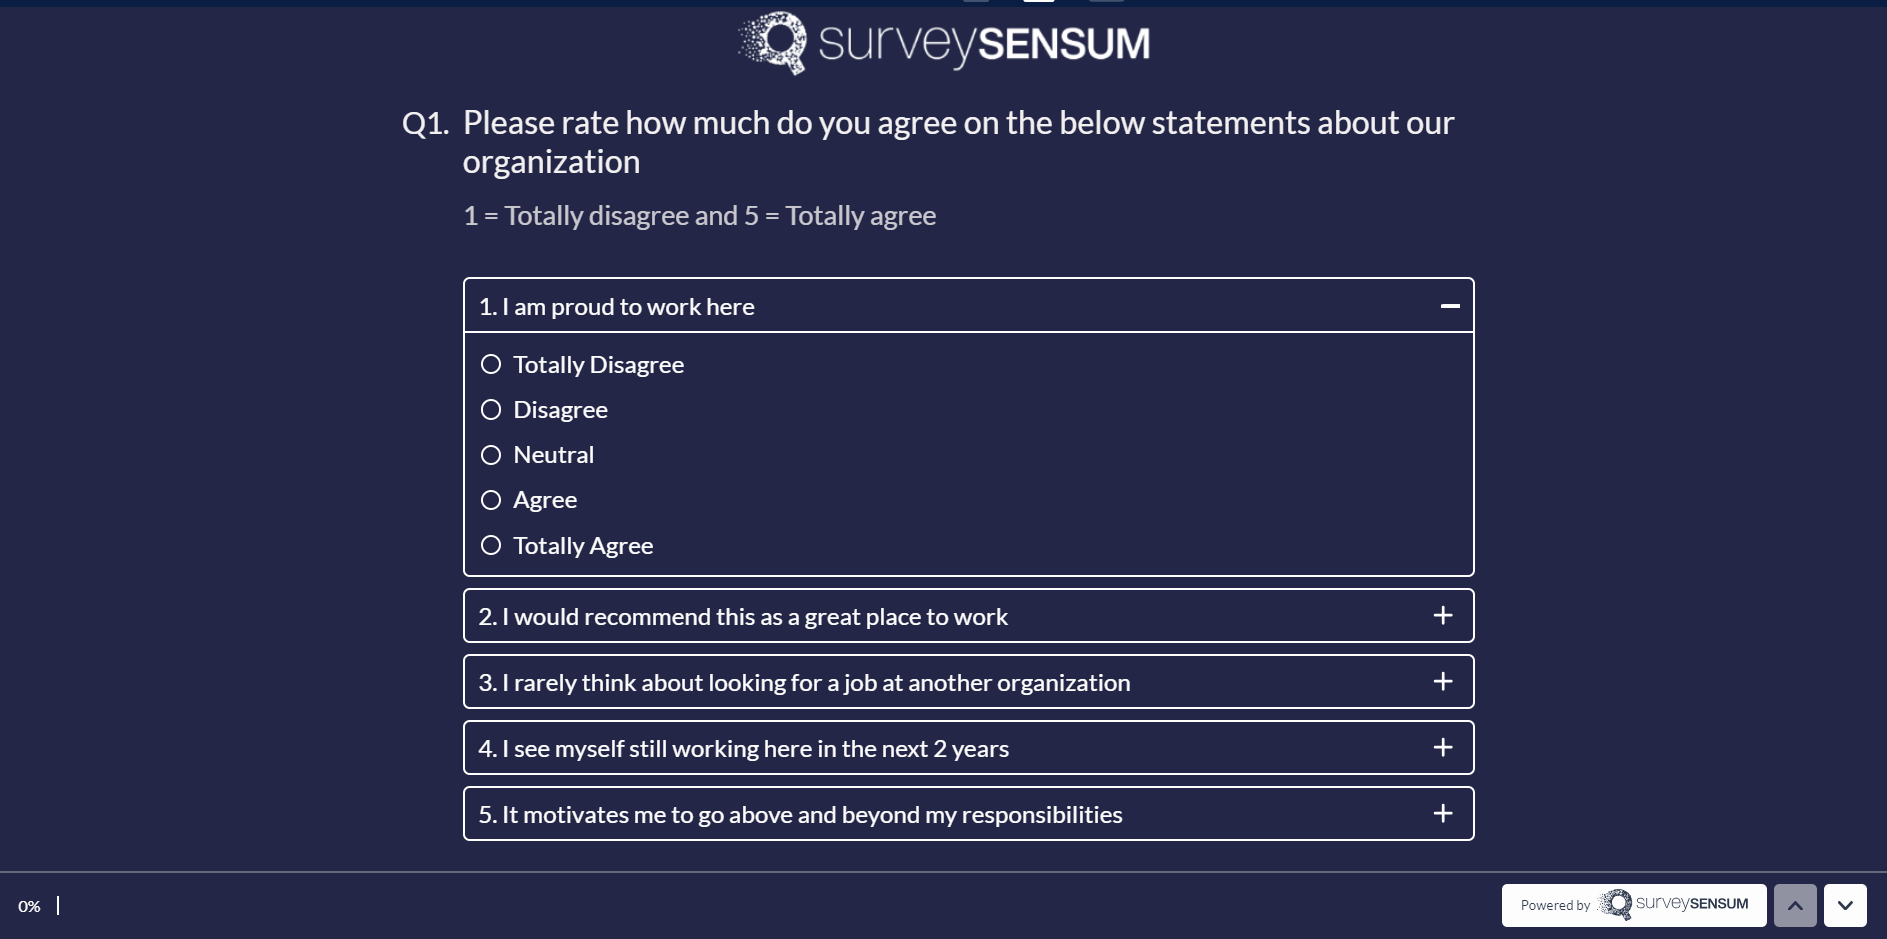  This is an image of an Employee experience survey where the employee is being asked to rate their experience on different aspects of work culture like what they think about the workplace, if they would recommend the company to others if they are looking for other jobs if they want to work in there for the next two years, and if the work motivates them to go above and beyond their responsibilities. 